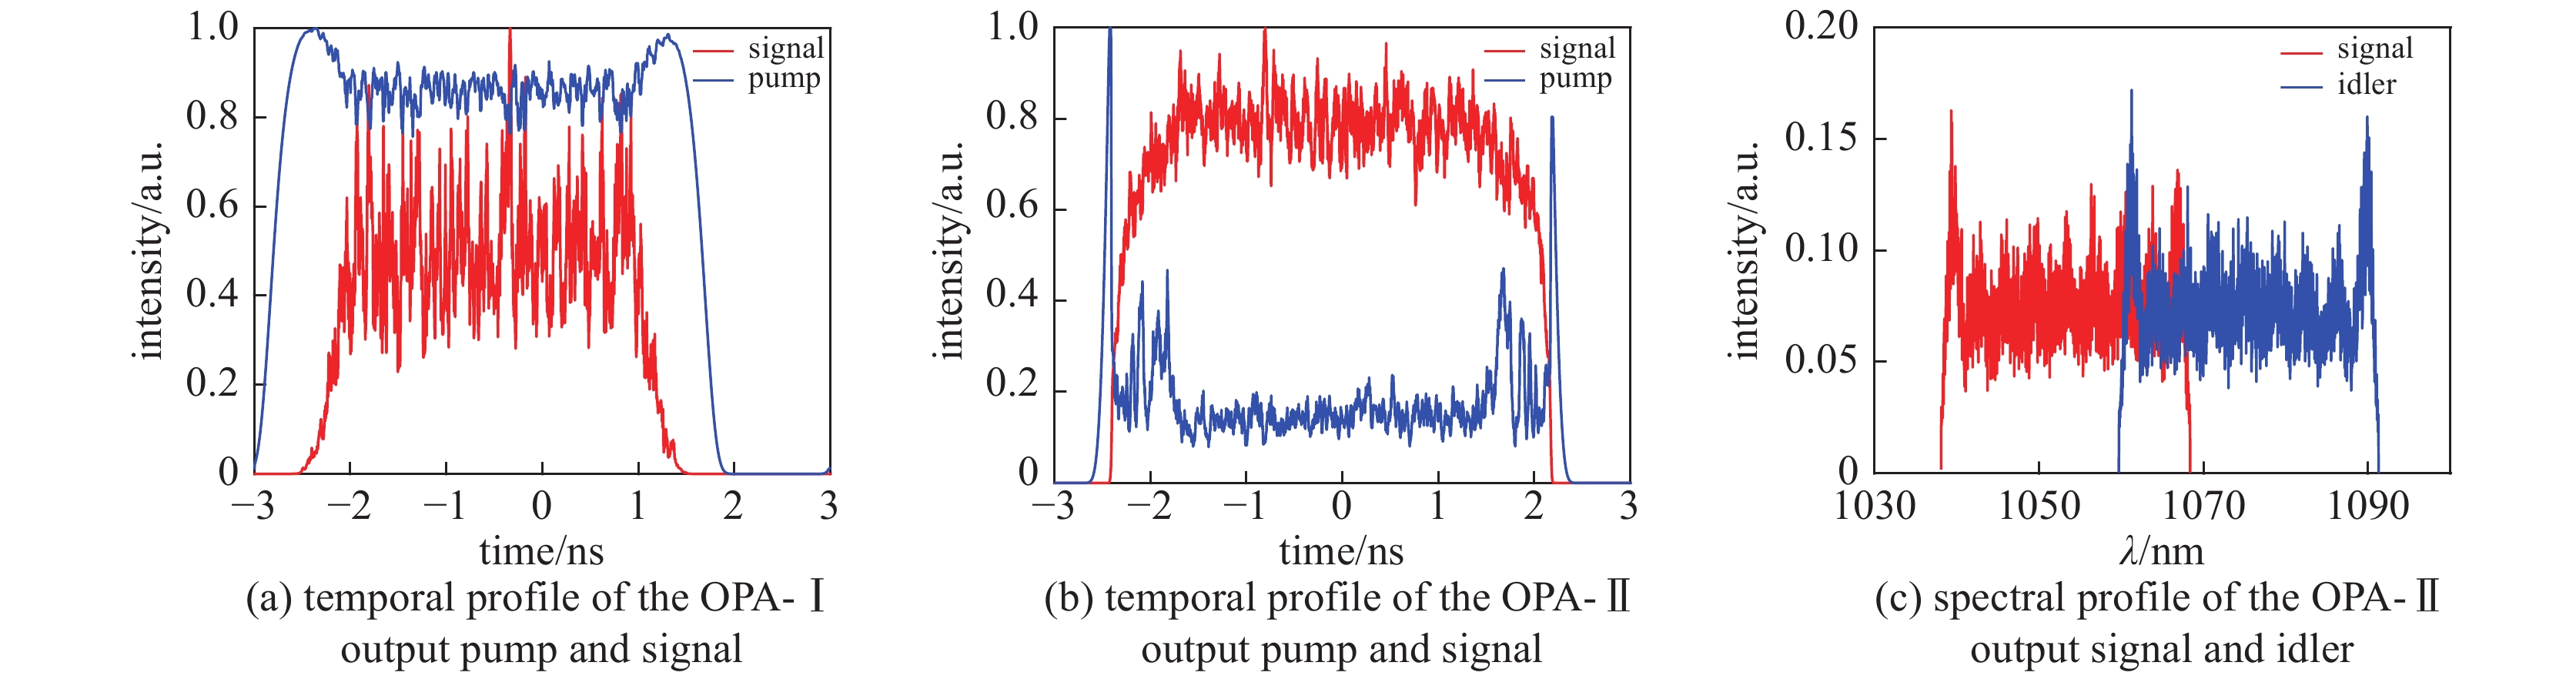 Numerical simulation temporal characteristics of OPA processes